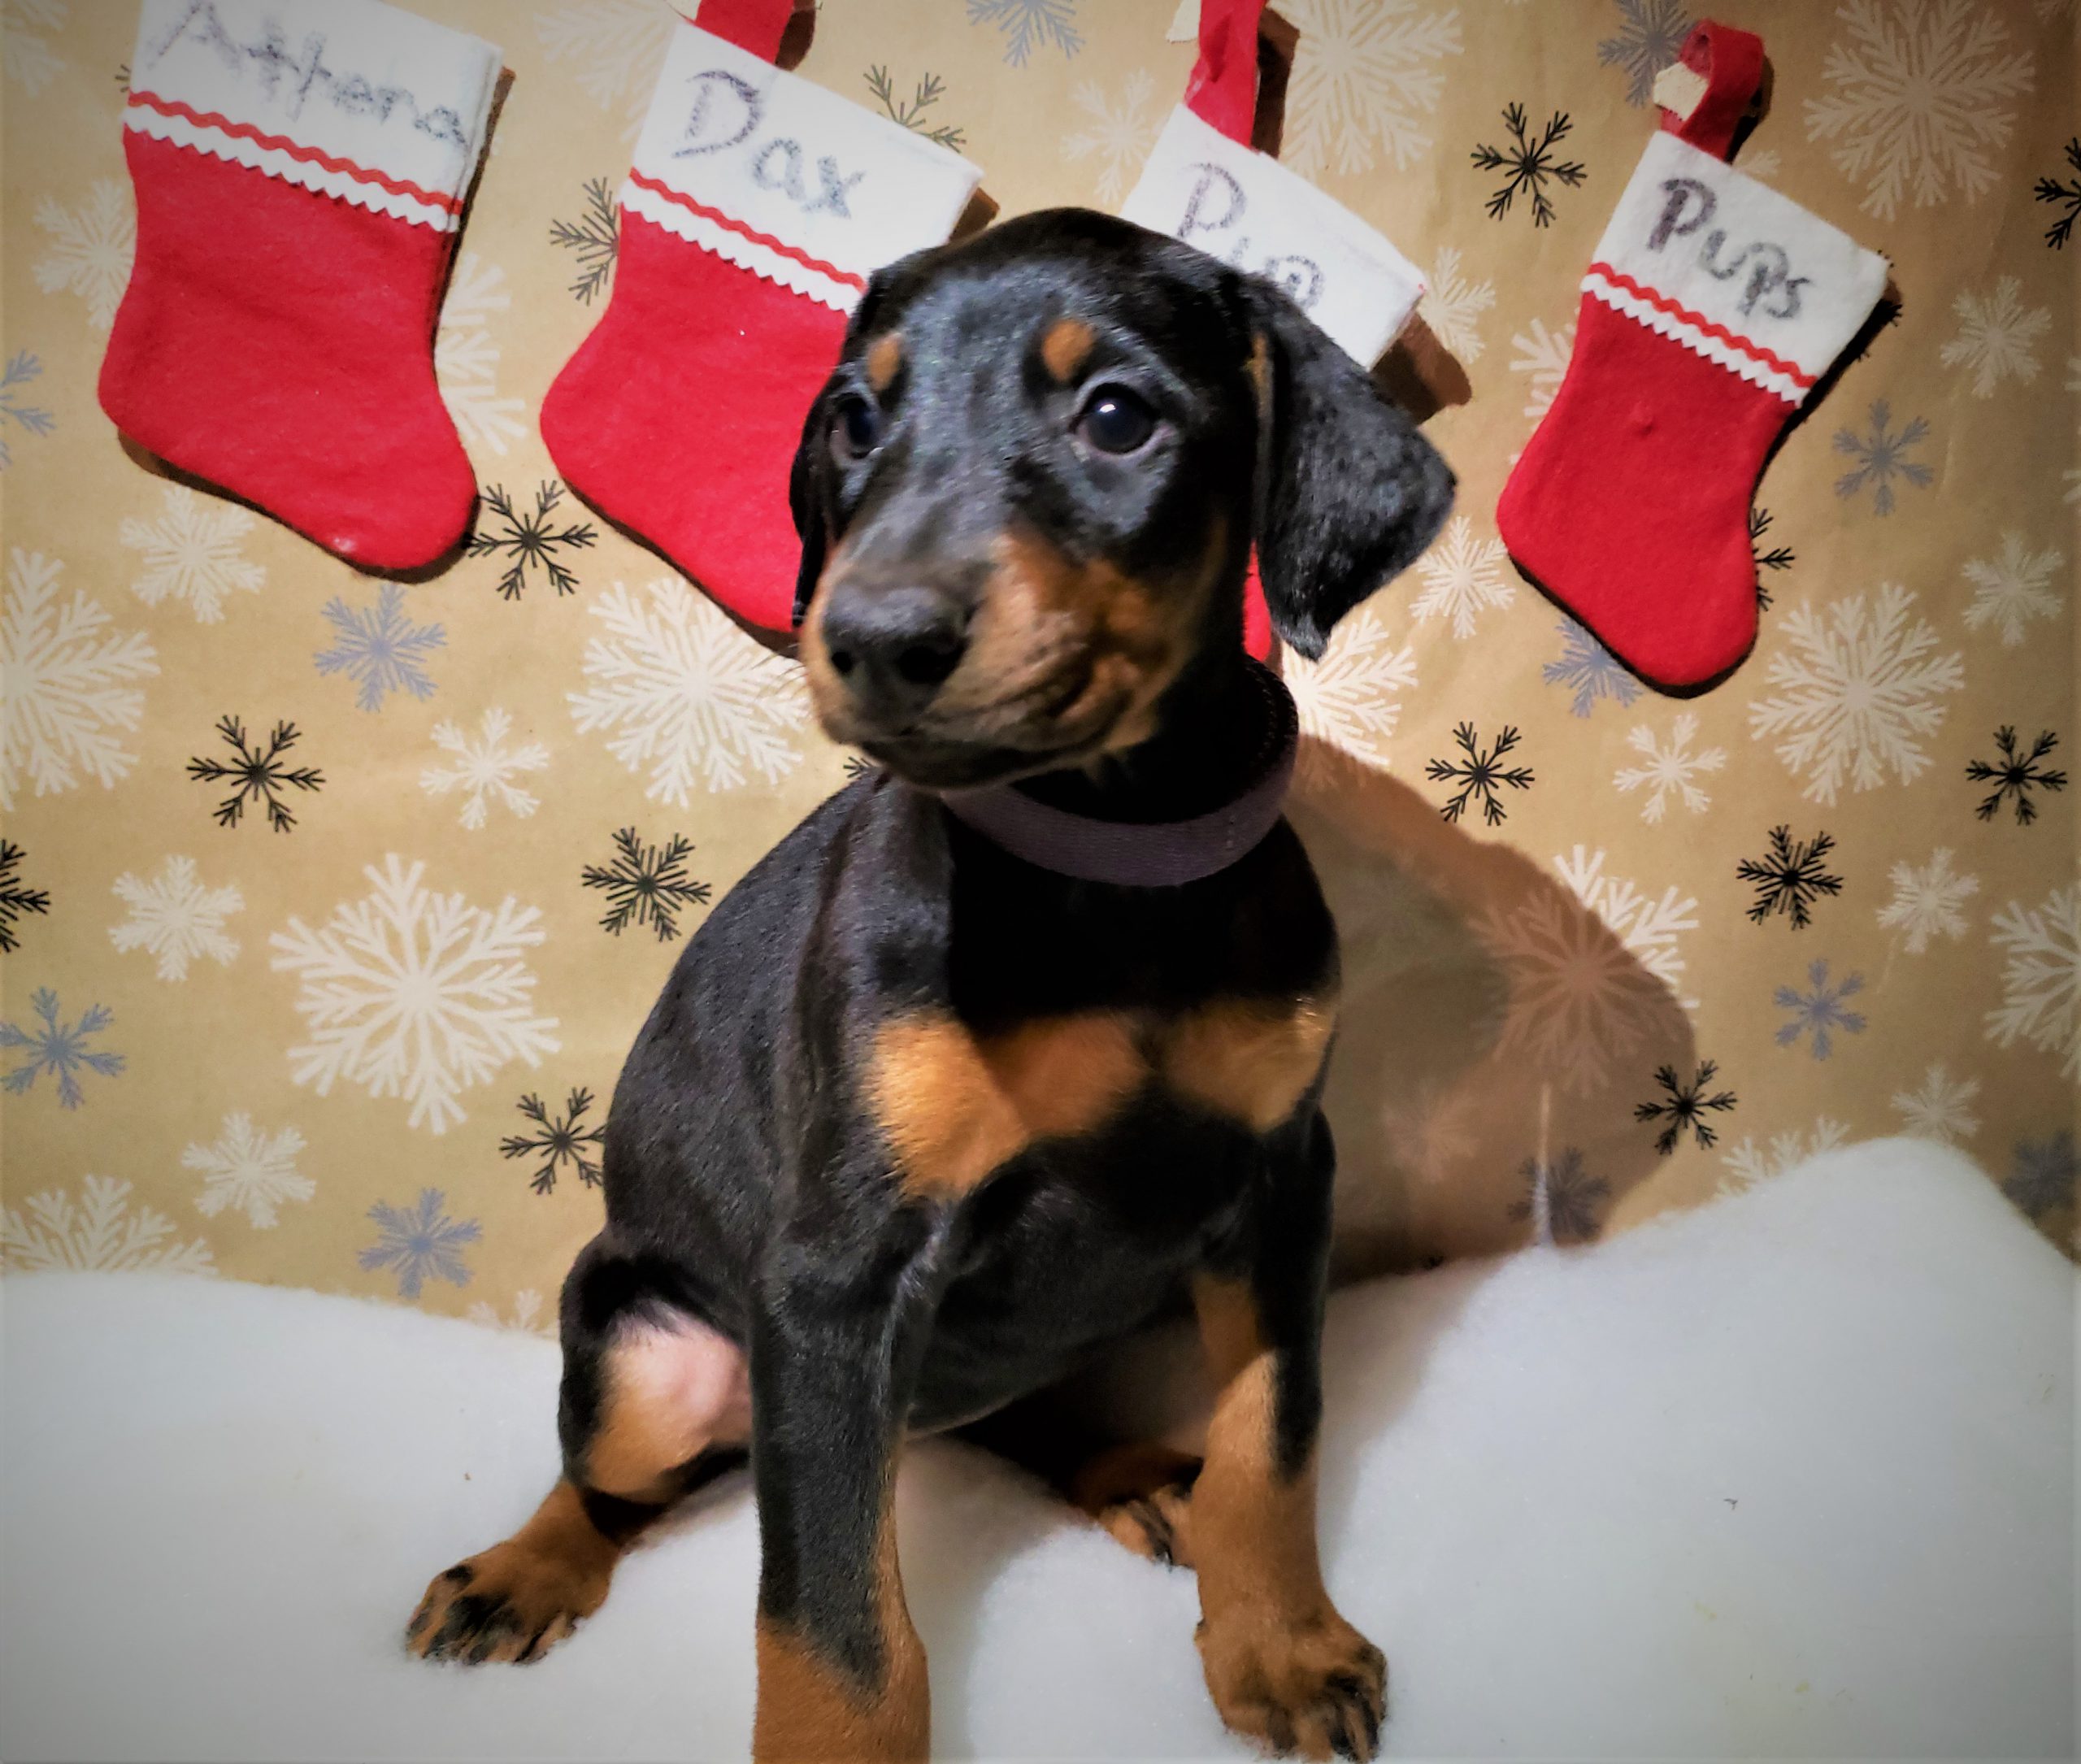 a puppy with Christmas decors in the background